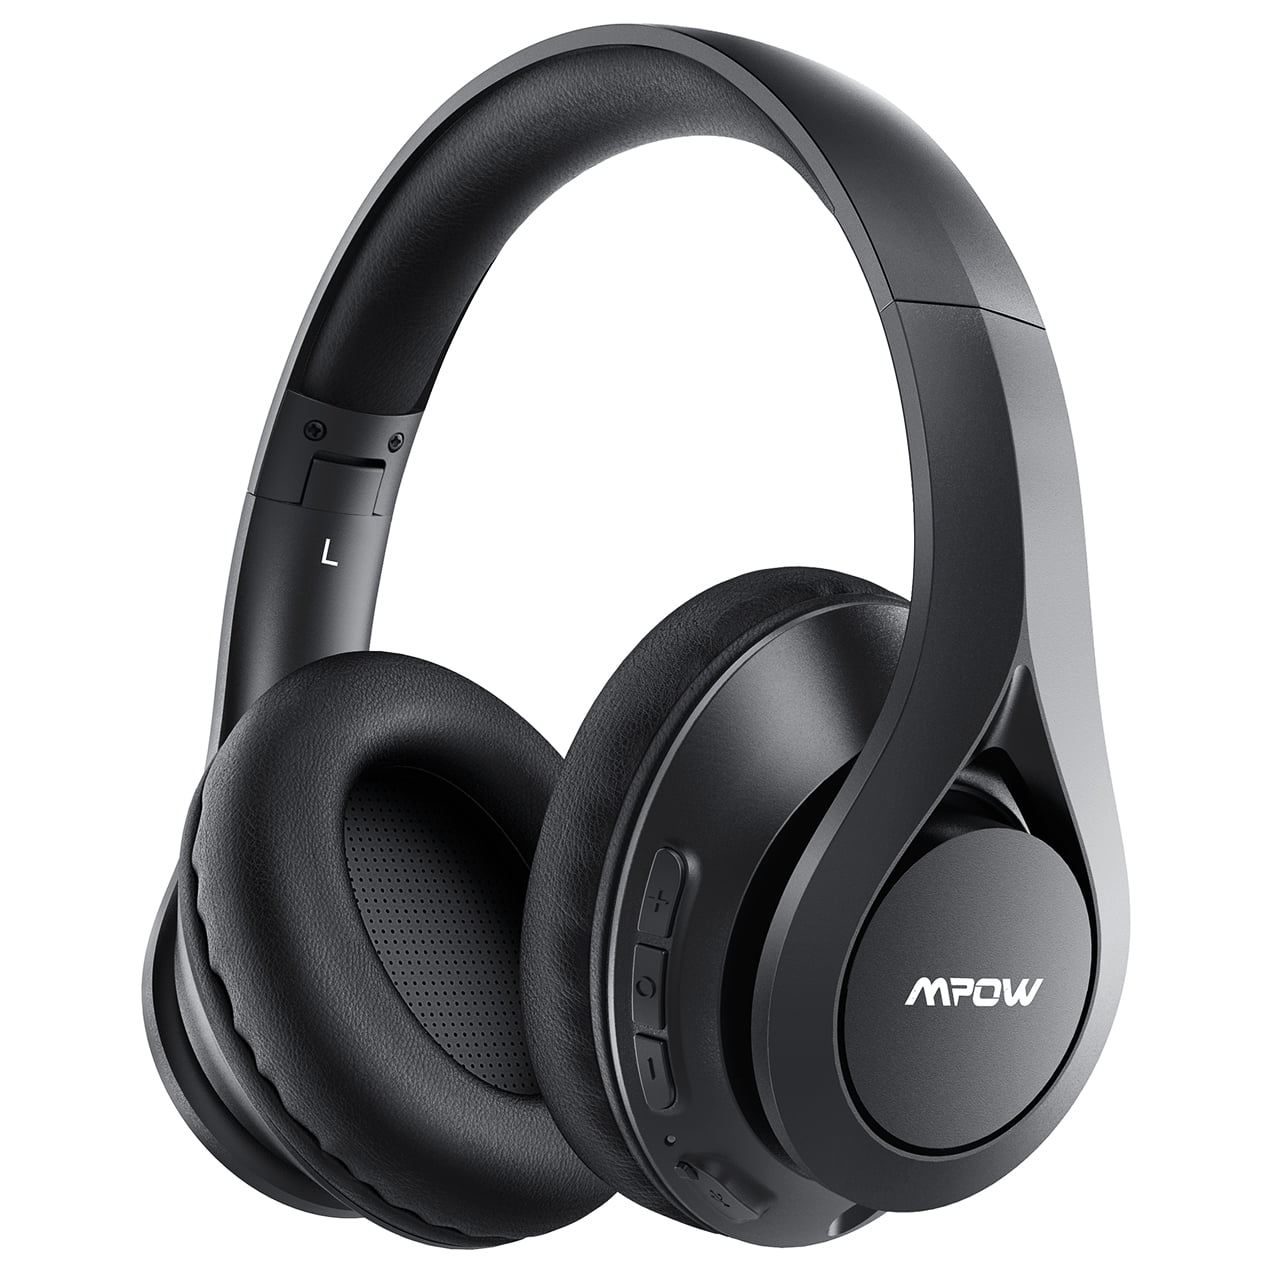 zoom Lada veteran Mpow 059 Over-Ear Bluetooth Headphones withNoise Cancelling Stereo,  Foldable Headband, Ergonomic Designed Soft Earmuffs, Built-in Mic, 65  Hours, with Microphone, Bluetooth 5.0, Protein Earpads Black - Walmart.com